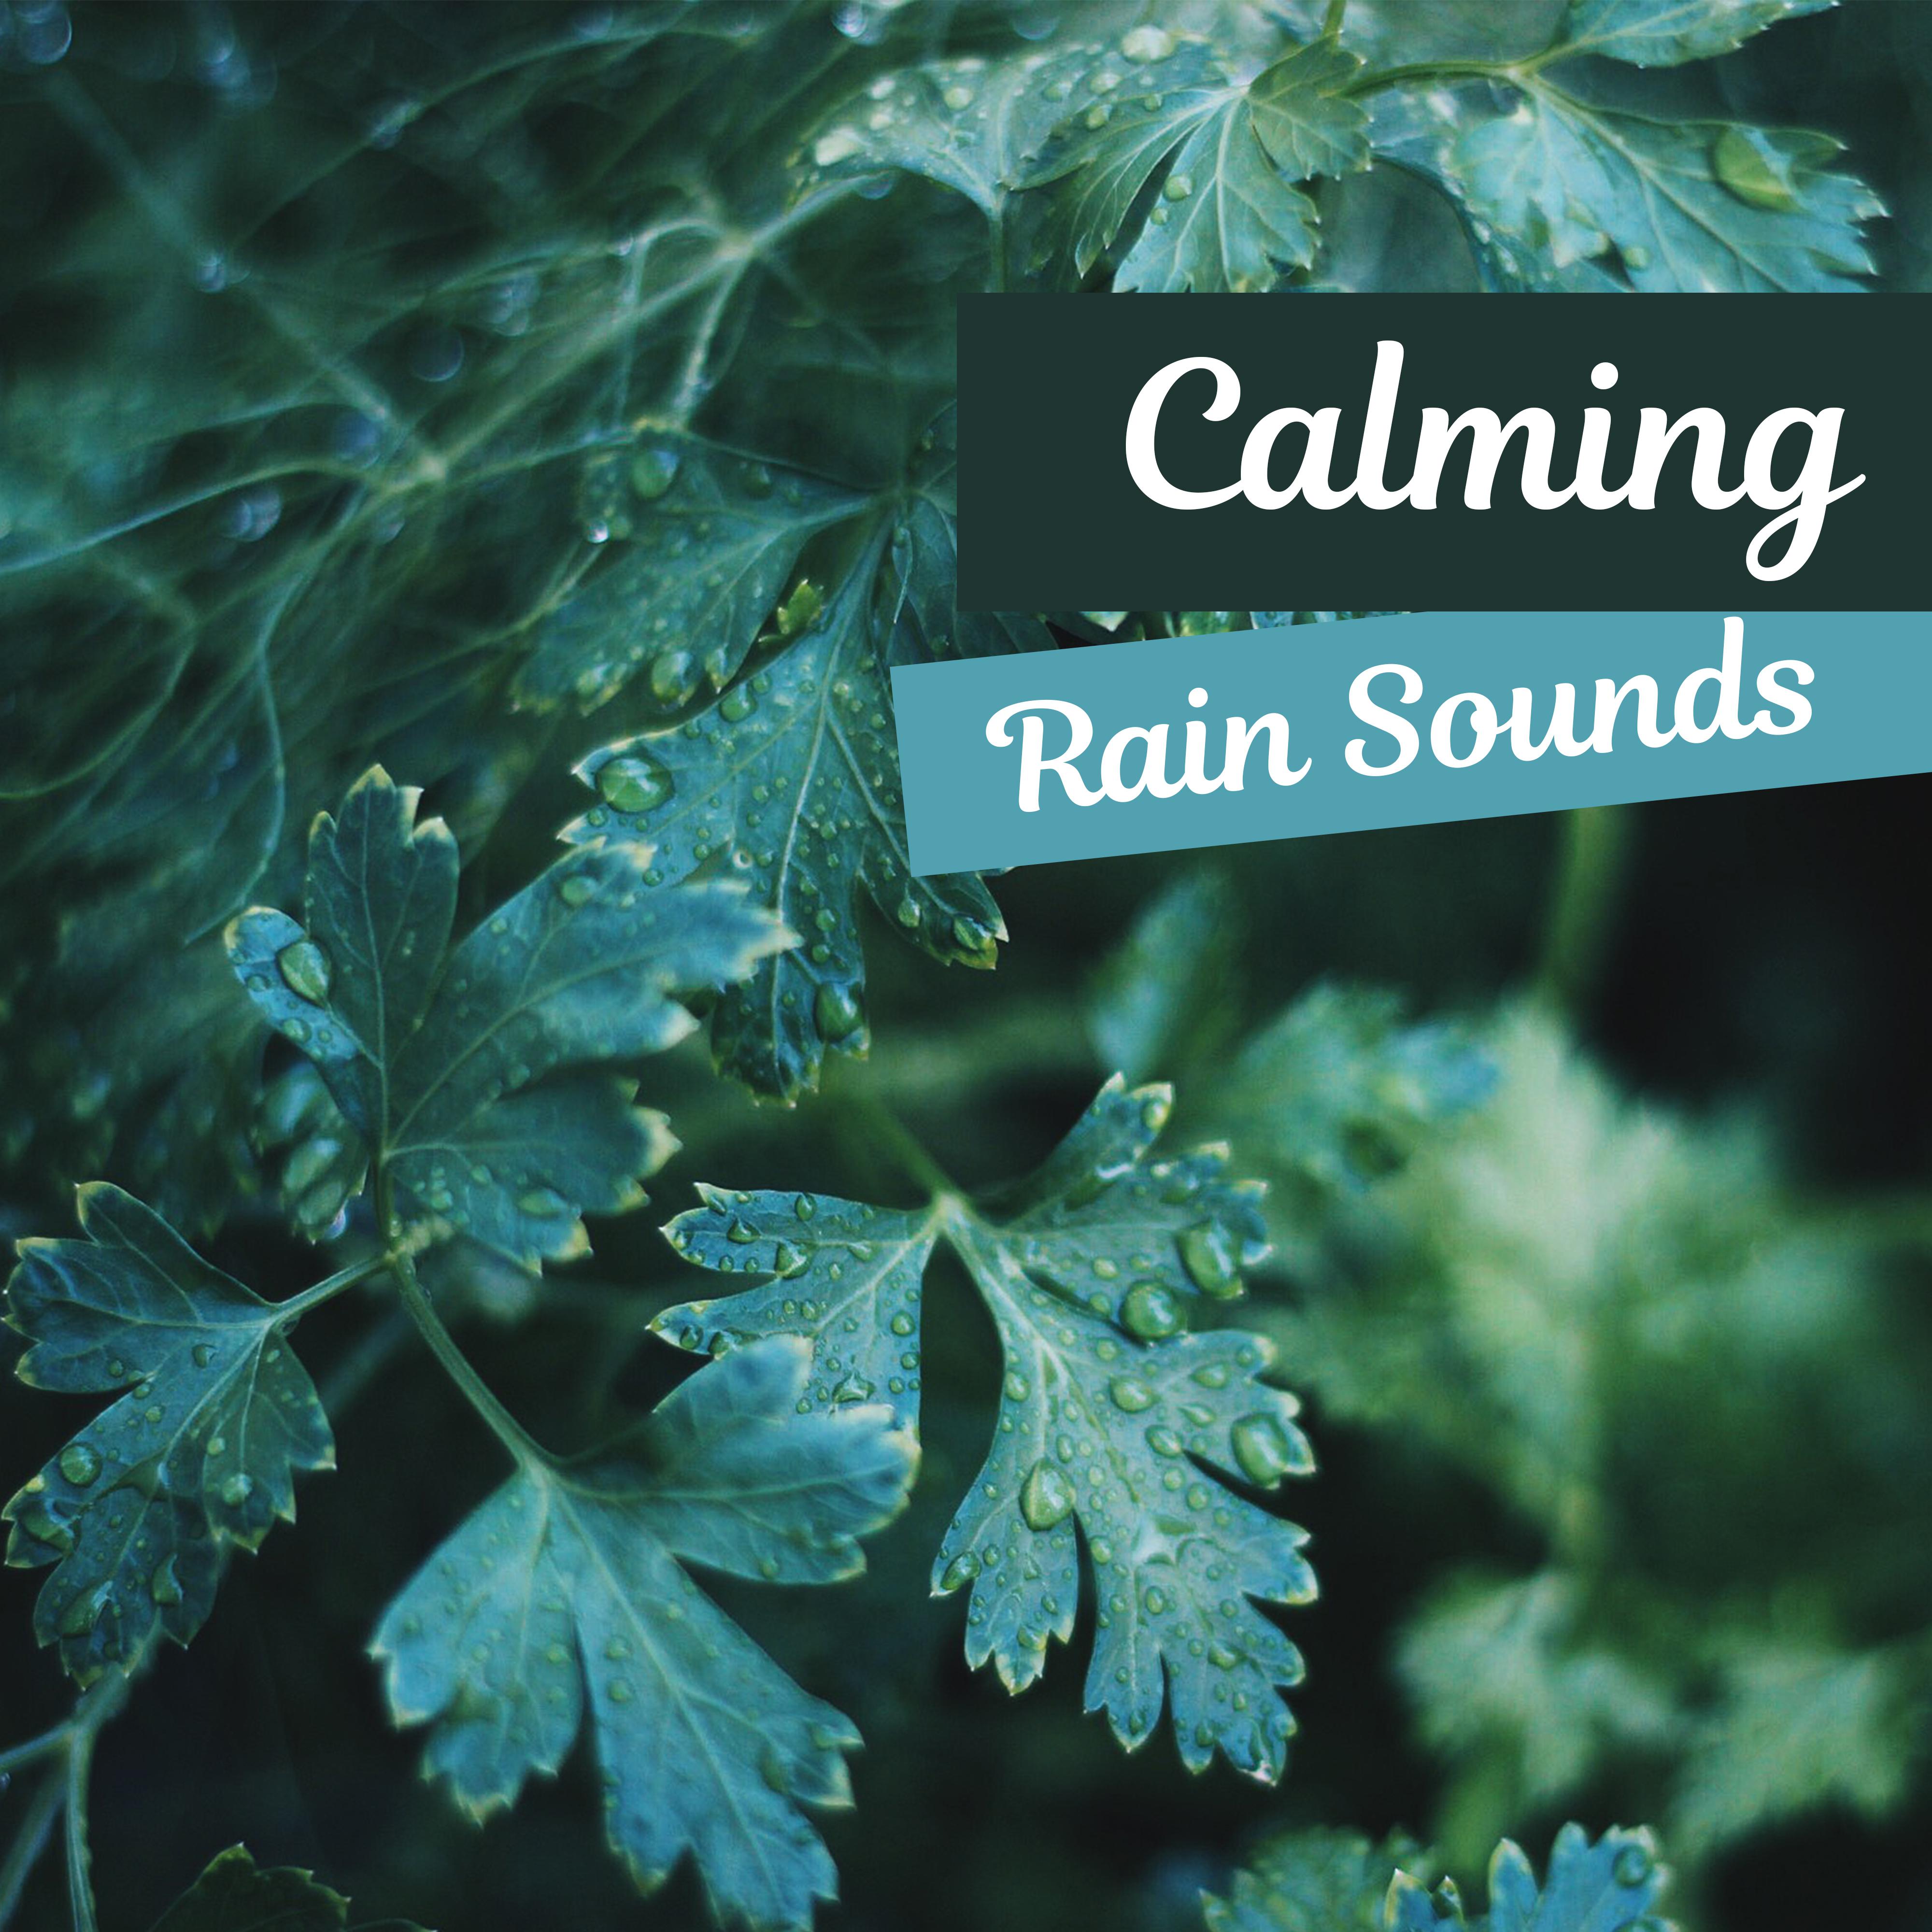 Calming Rain Sounds  Soft Sounds to Relax, Piano Relaxation, Easy Listening, New Age Music